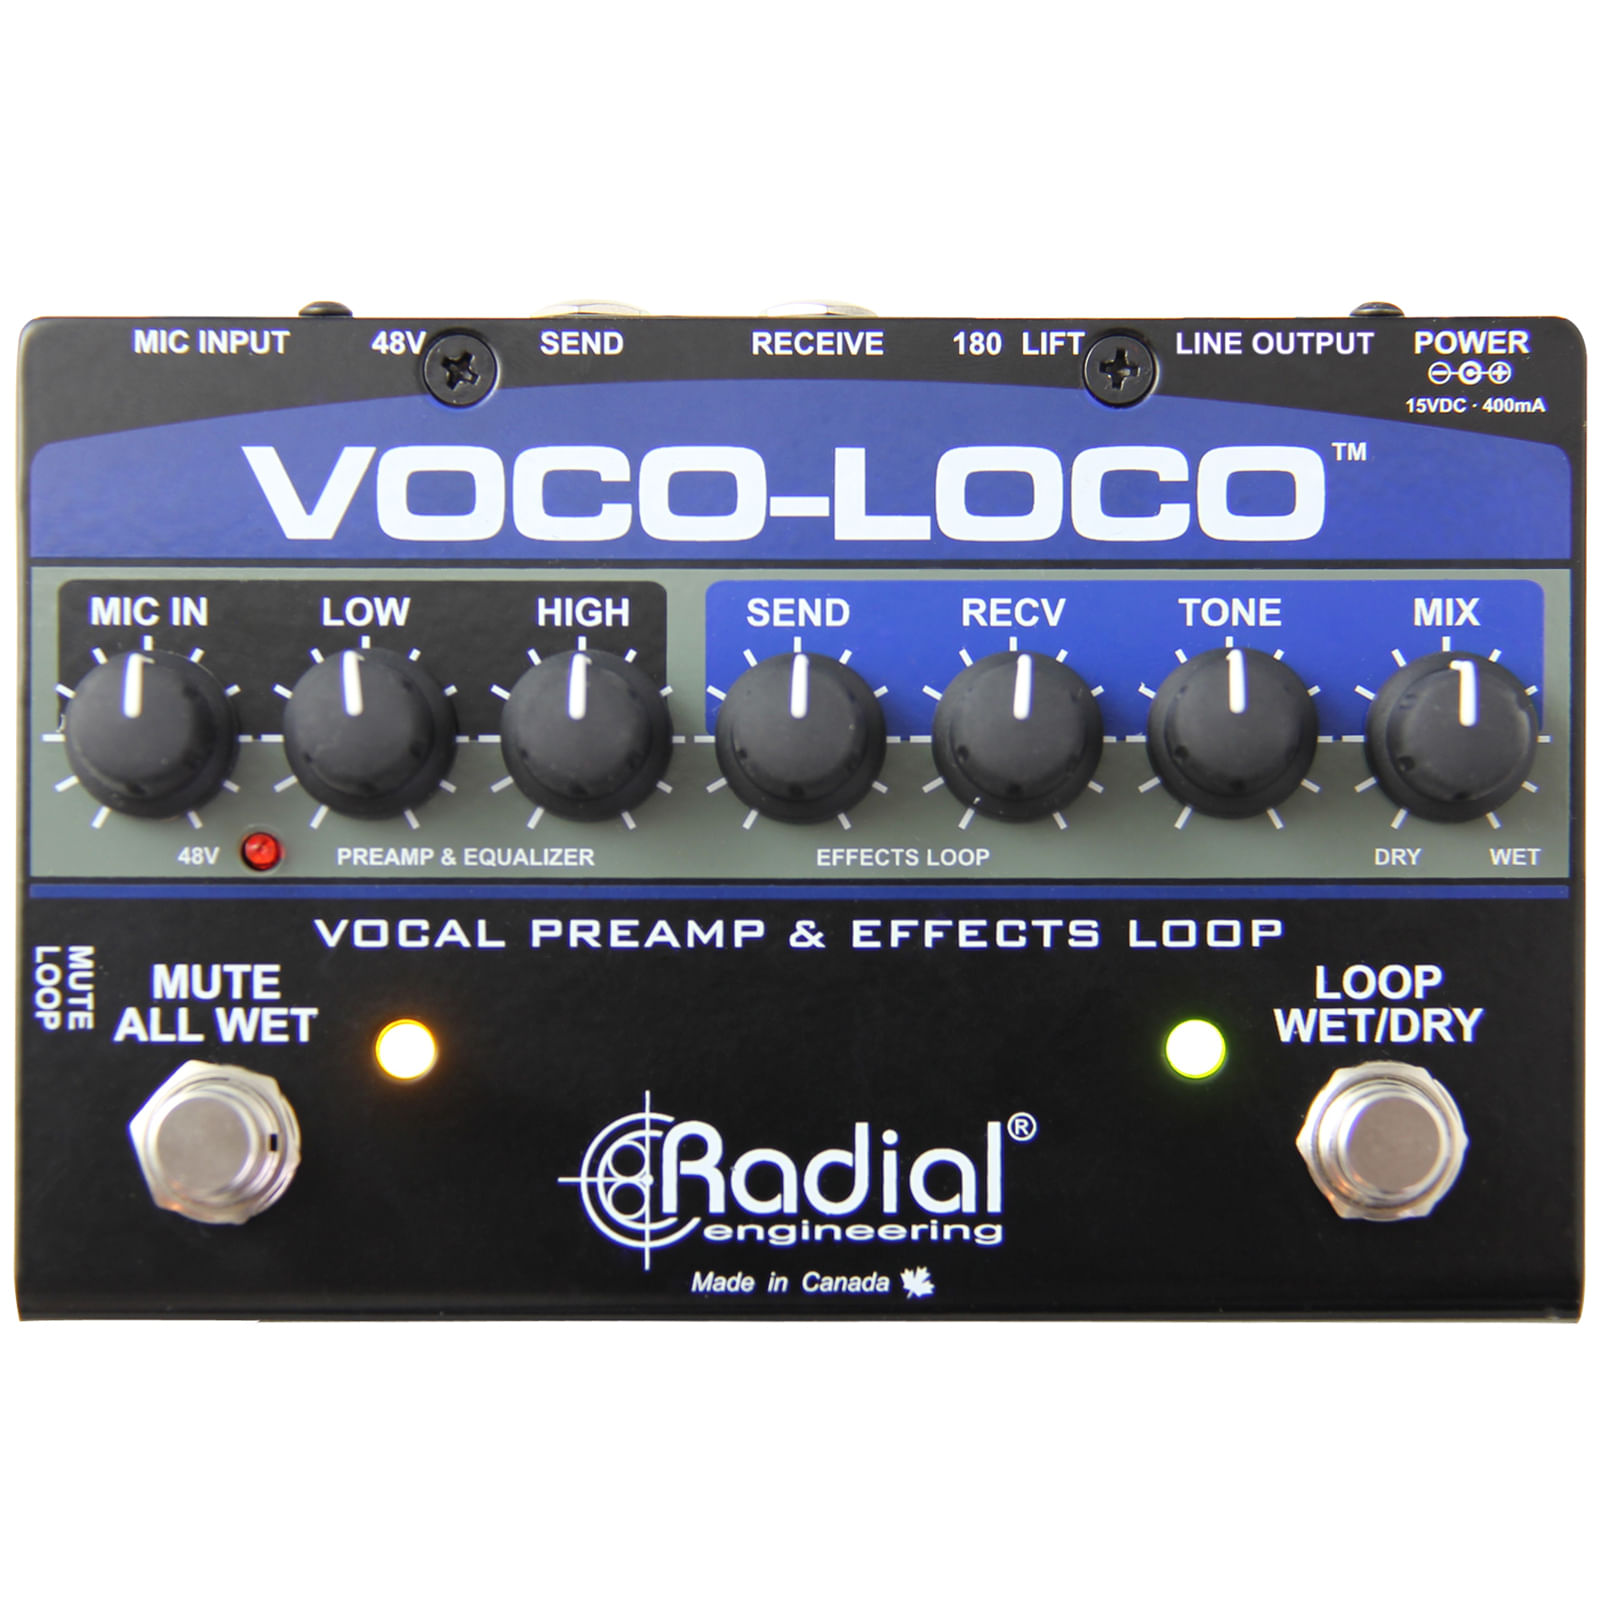 or　Radial　Switcher　for　Voco-Loco　Voice　Cosmo　Effects　Instrument　Music